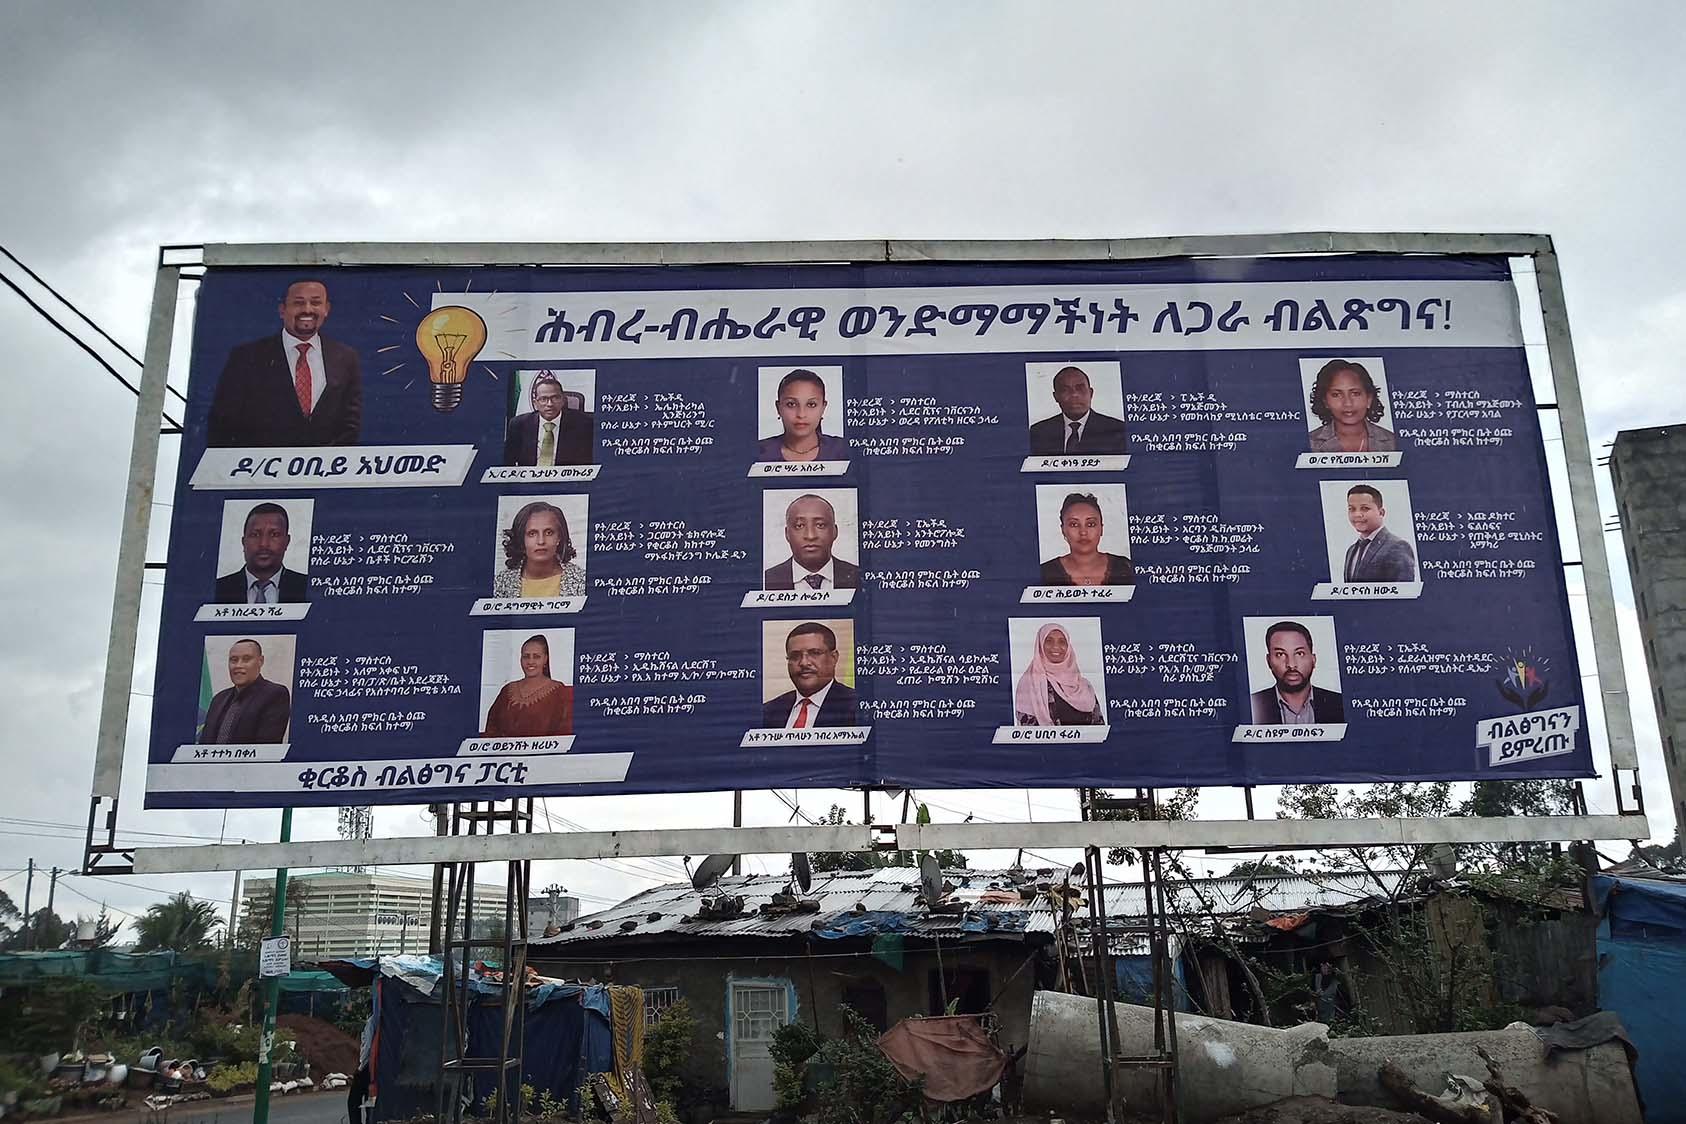 Addis Ababa election candidates for the ruling Prosperity Party with Prime Minister Abiy Ahmed, top left.